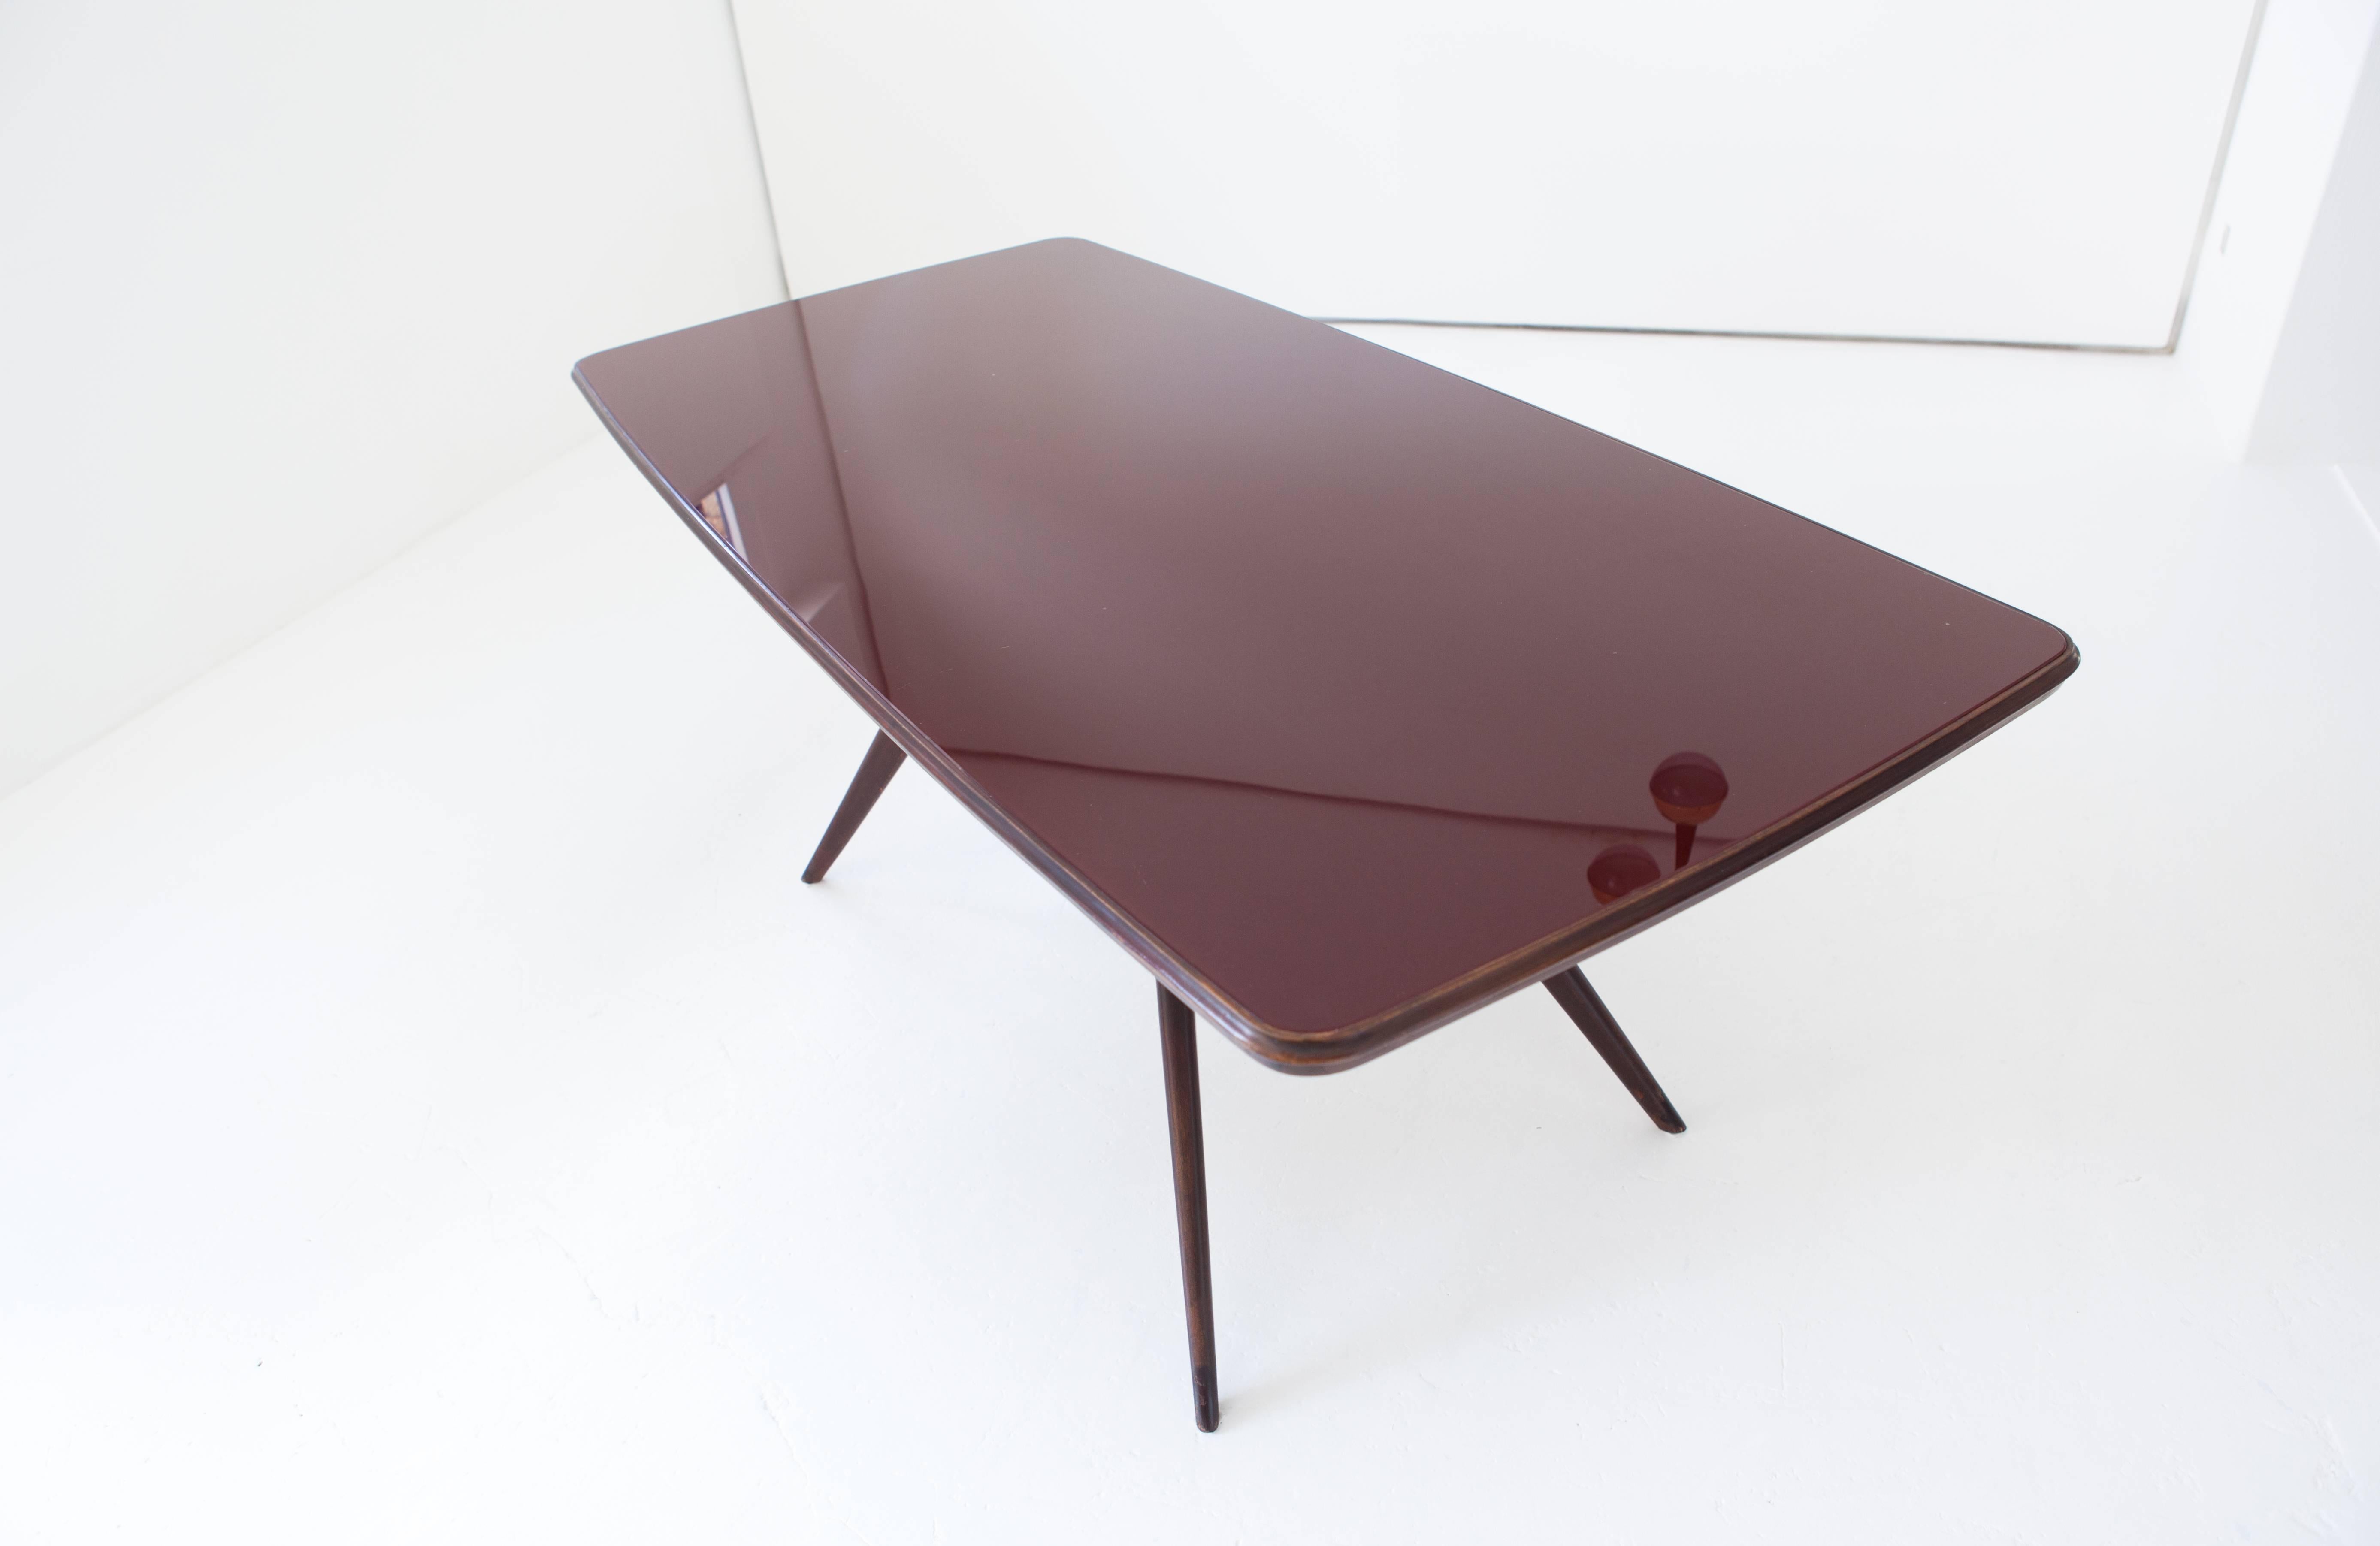 A modern dining rectangular table manufactured in Italy in 1950s
Solid mahogany wood, brick red / bordeaux retro-lacquered glass top
Some of our clients use this king of sculptural and airy objects as a desk or a conference table.
The designer is